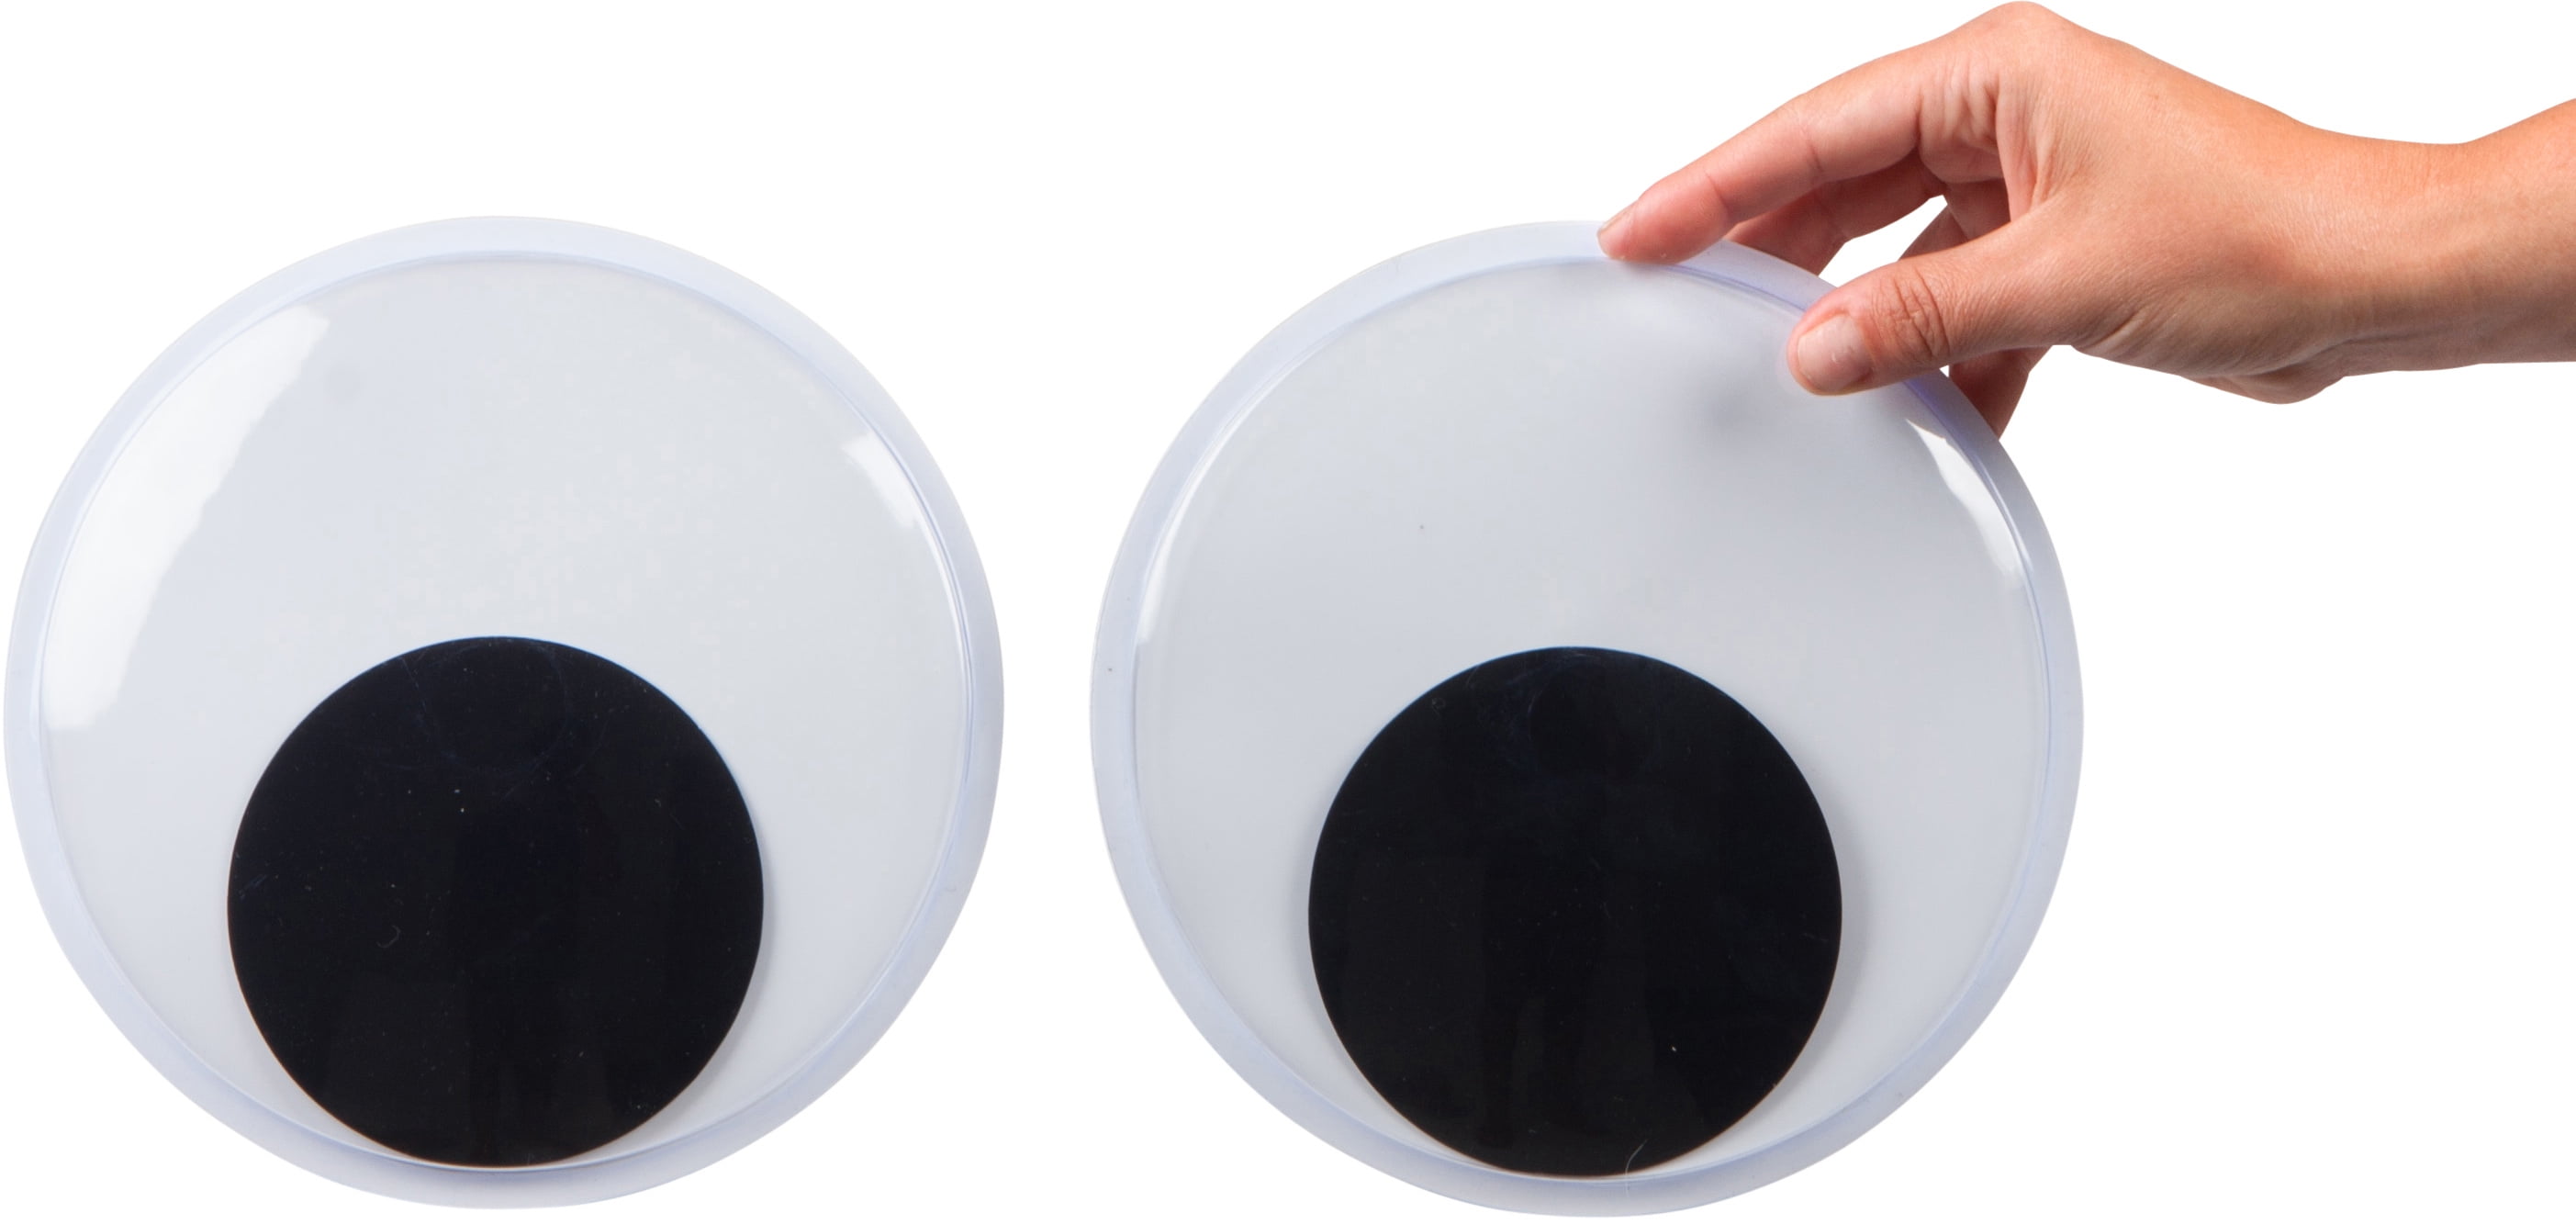 Giant Googly Eyes - Set of 2 - By Allures & Illusions